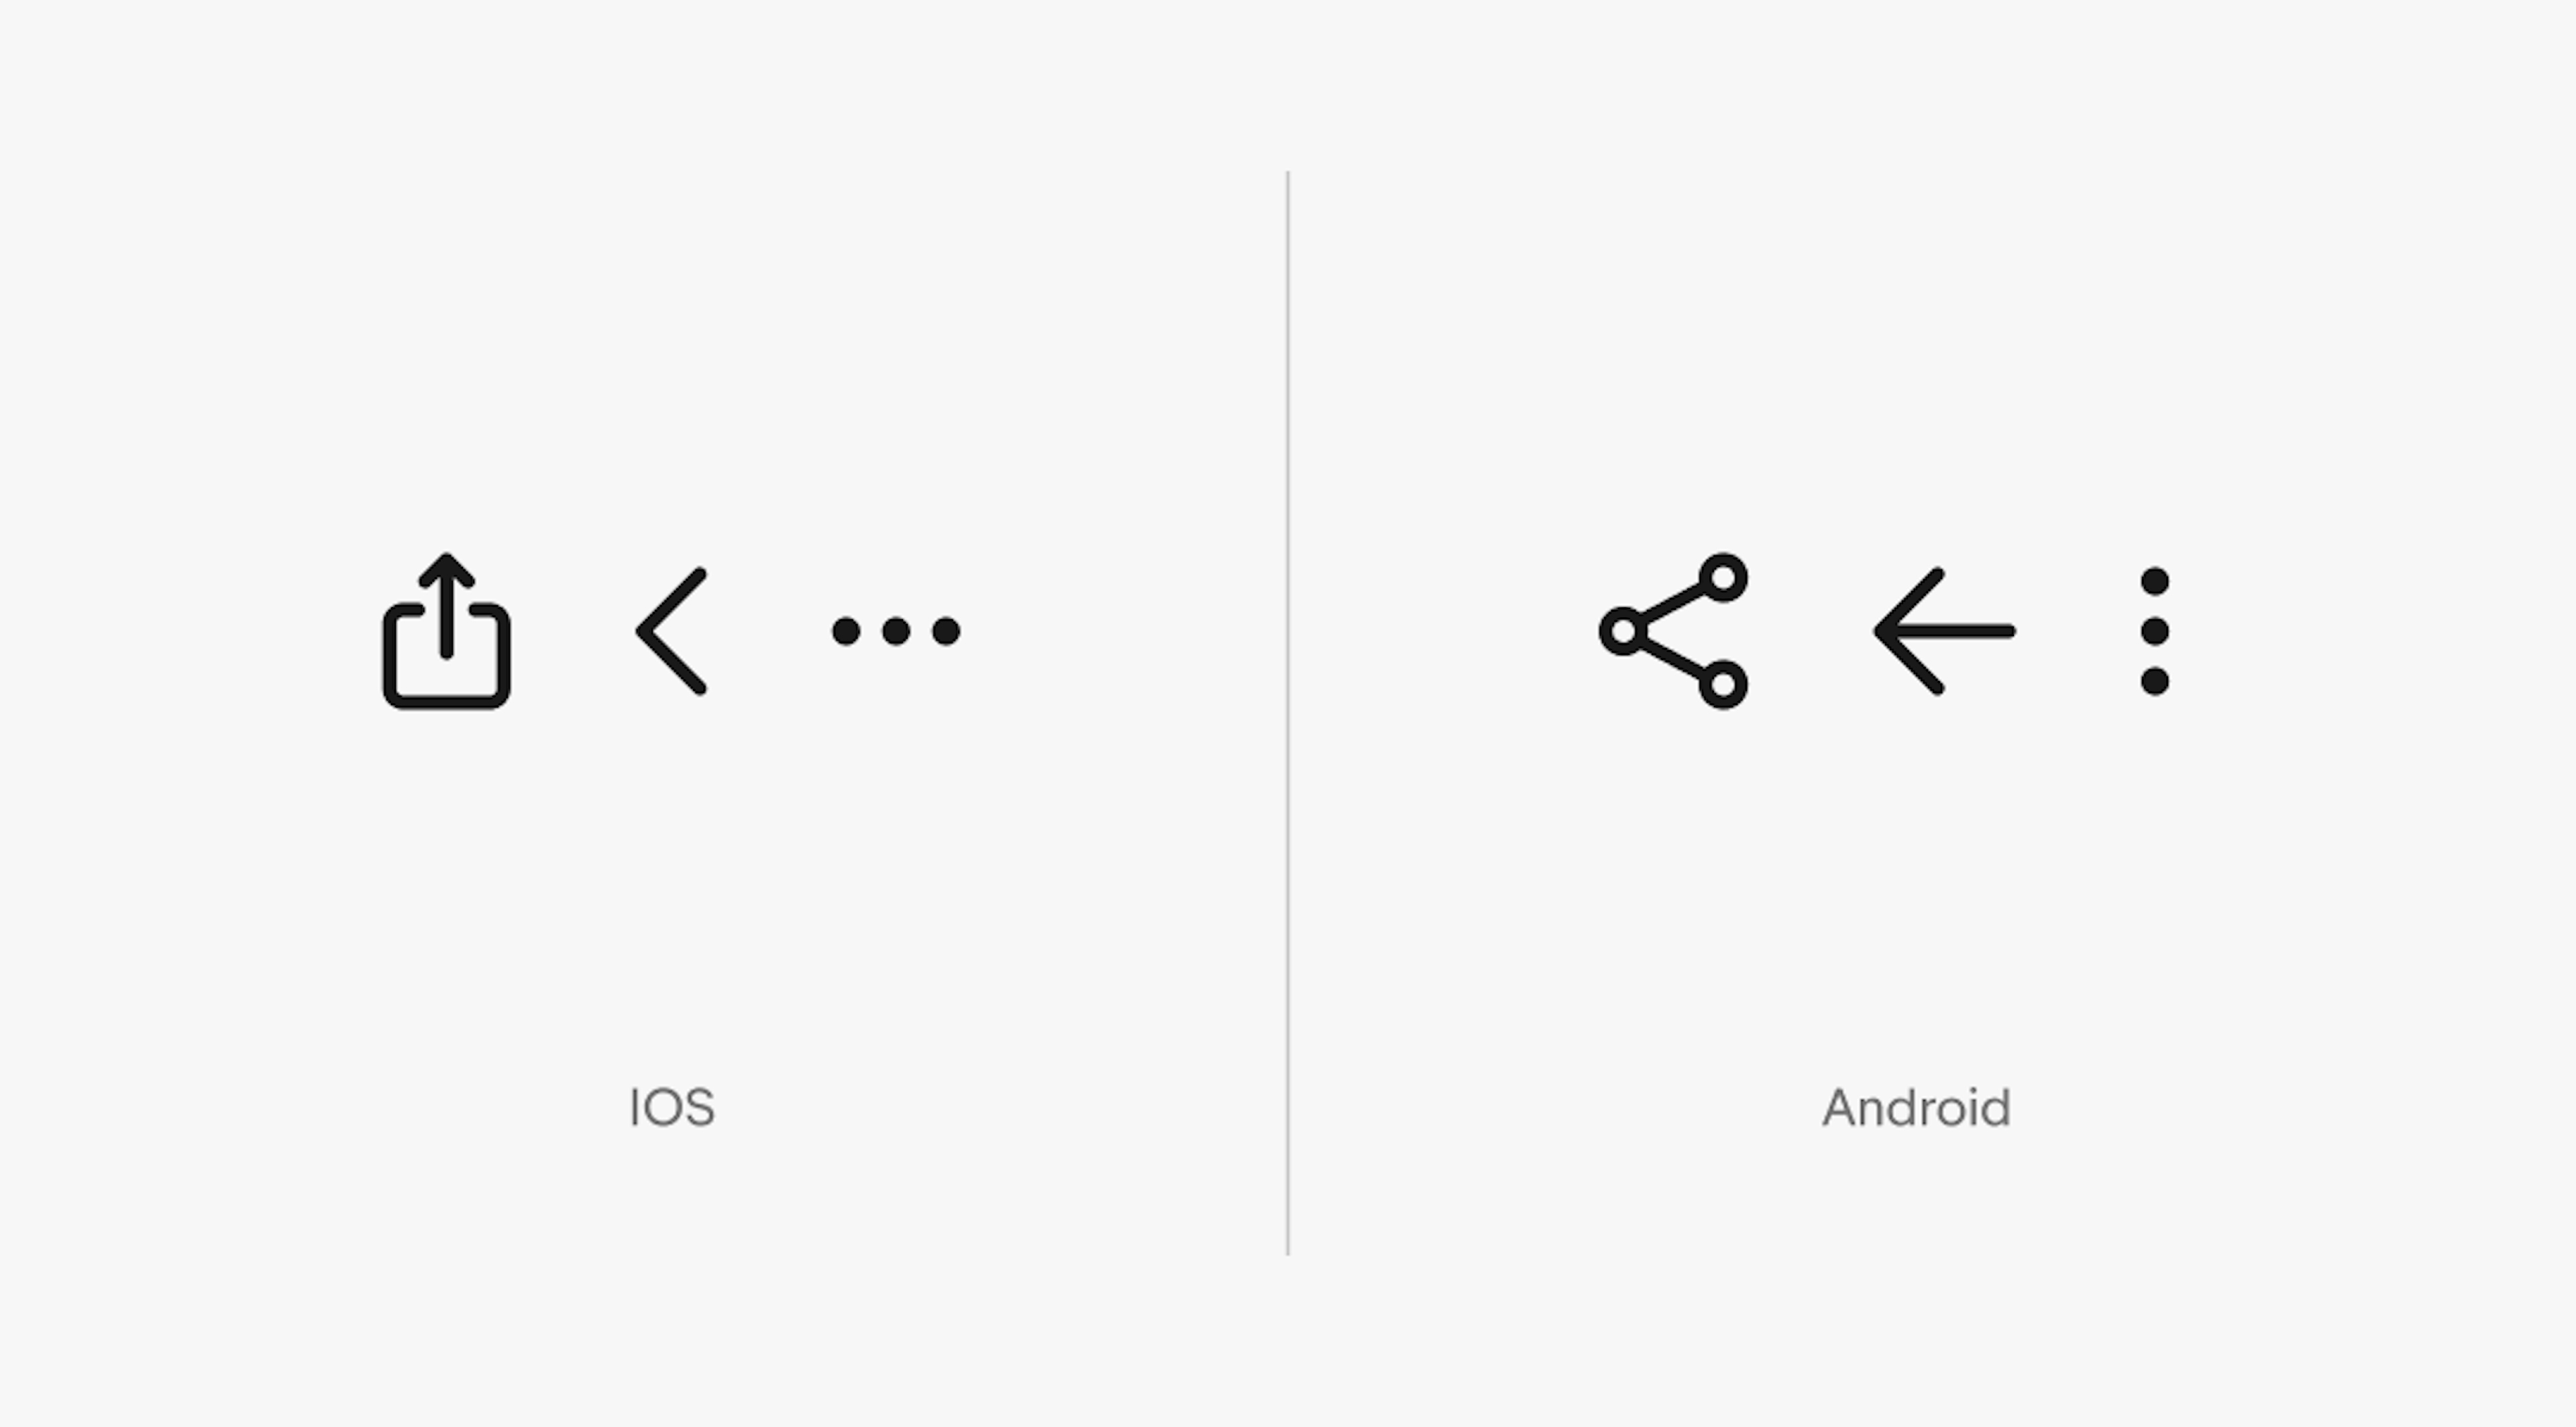 Two columns of icons for IOS and Android. IOS includes a share, chevron, and overflow icon. The share is a box with an upward arrow, the chevron is an arrow without the tail, and the overflow is made of three dots in a horizontal orientation. Android includes a share, arrow, and overflow icon. The share icon is 3 dots in an arrow-like formation with a line attaching them, the arrow is a standard arrow with a tail, and the overflow icon is three dots in a vertical orientation.